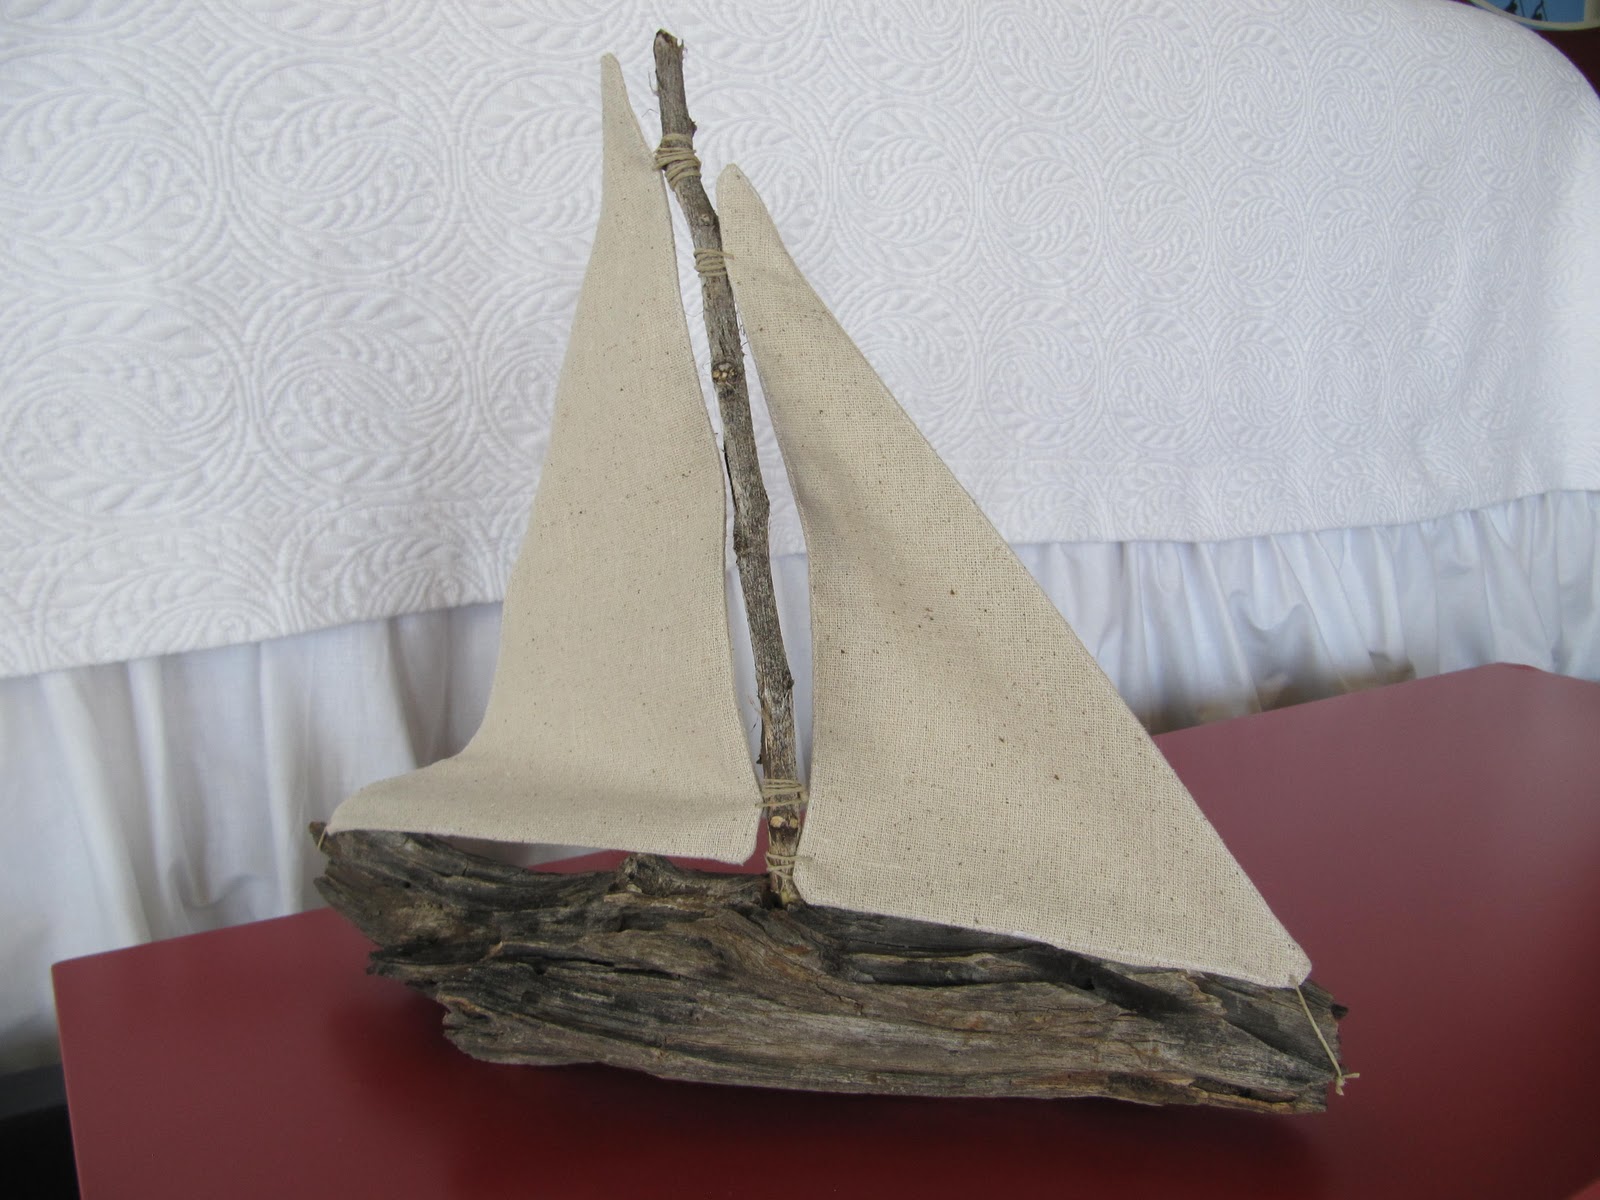 laurie's-projects: driftwood sailboat tutorial